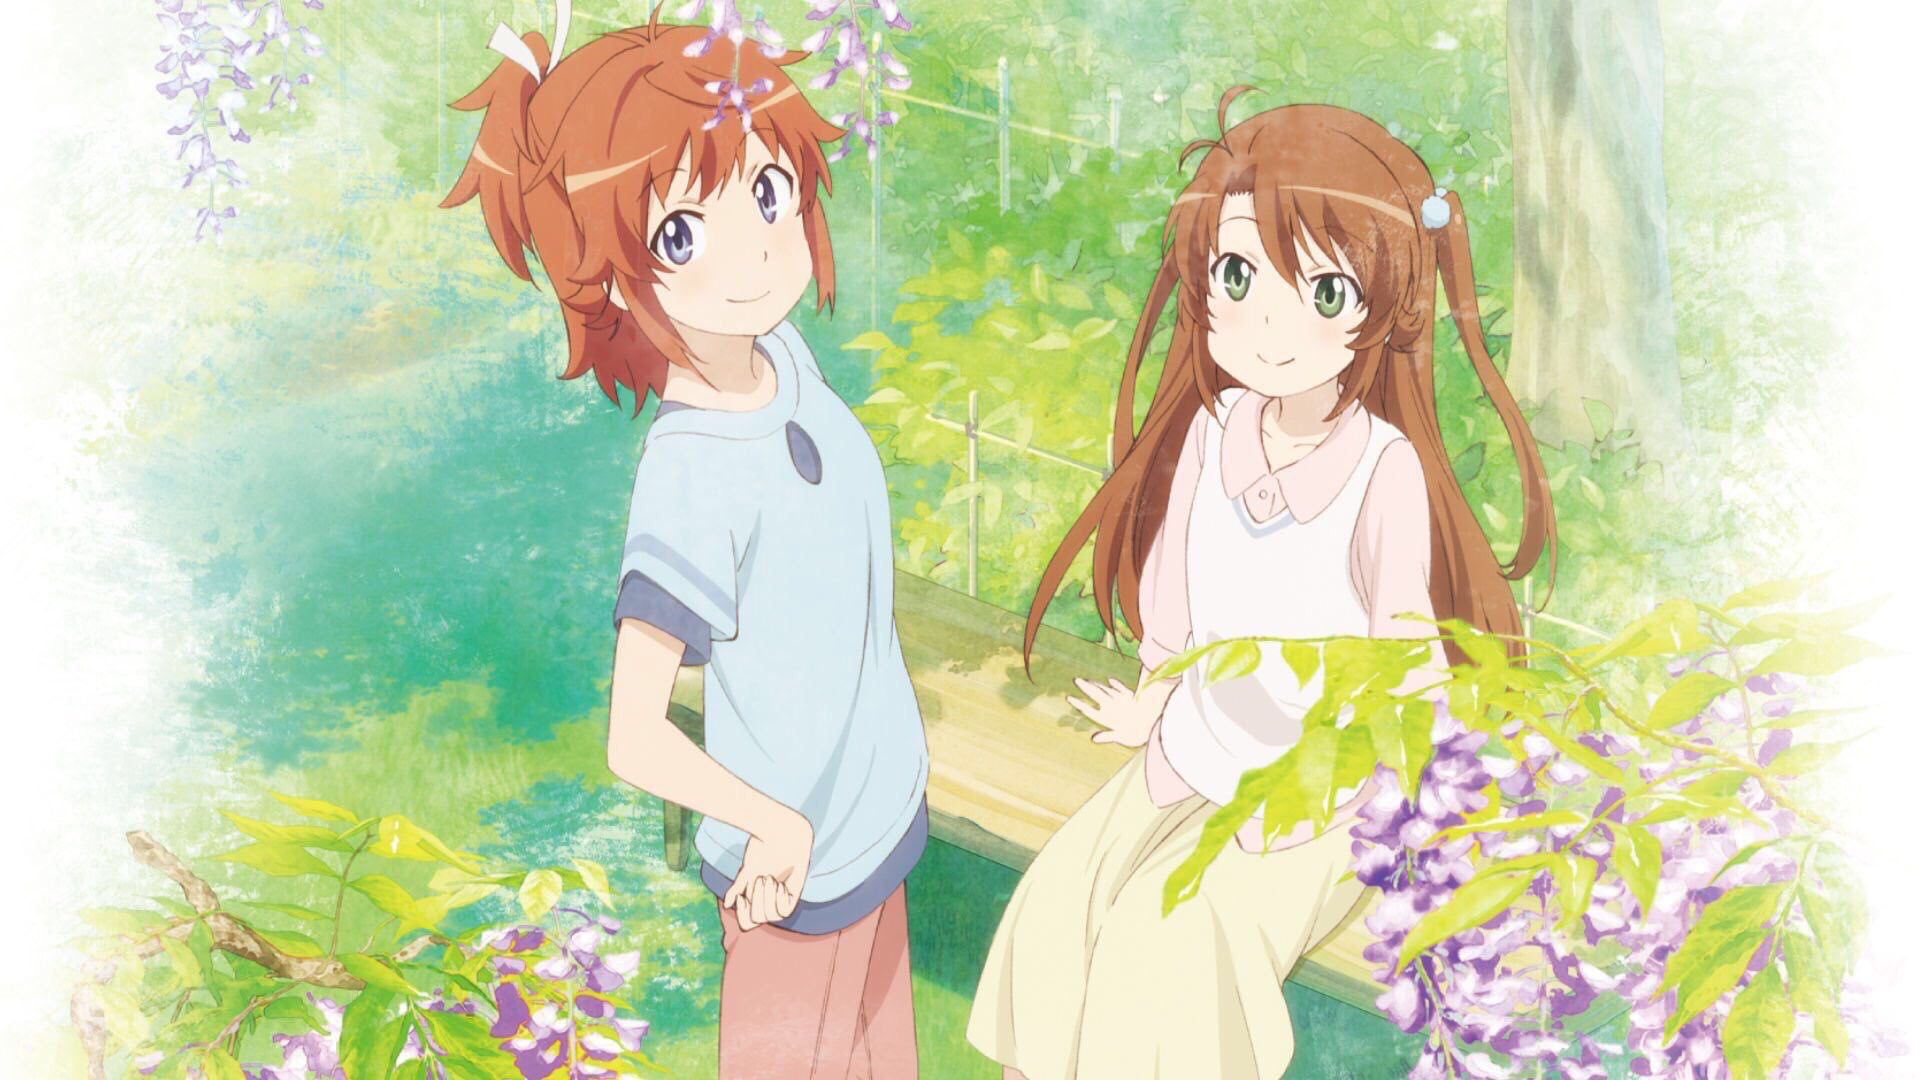 Not to mention the cutest character in the non biyori wwwwwwww 3